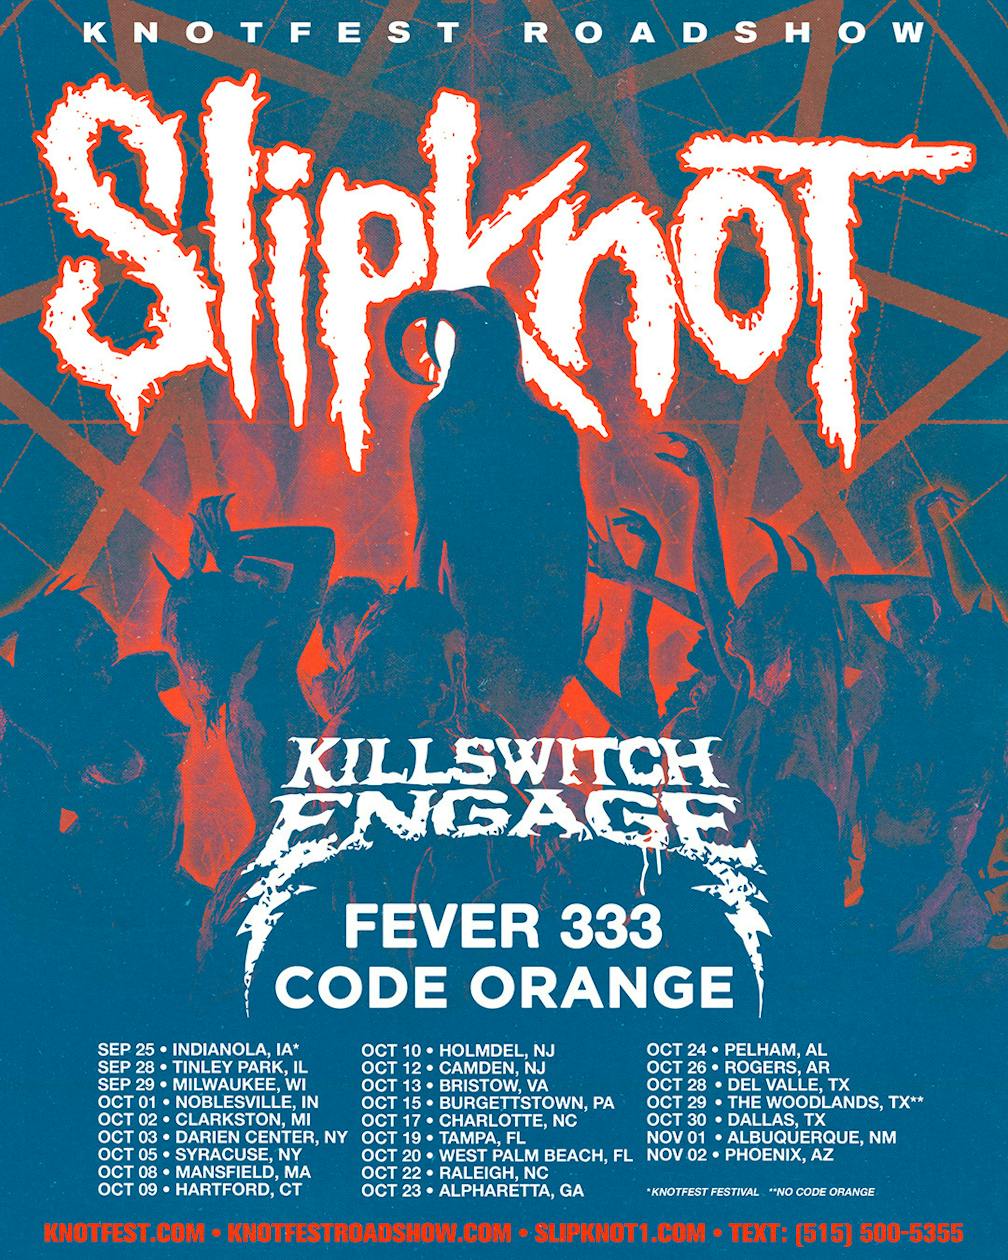 Slipknot announce Knotfest Roadshow 2021 with Killswitch Engage, FEVER